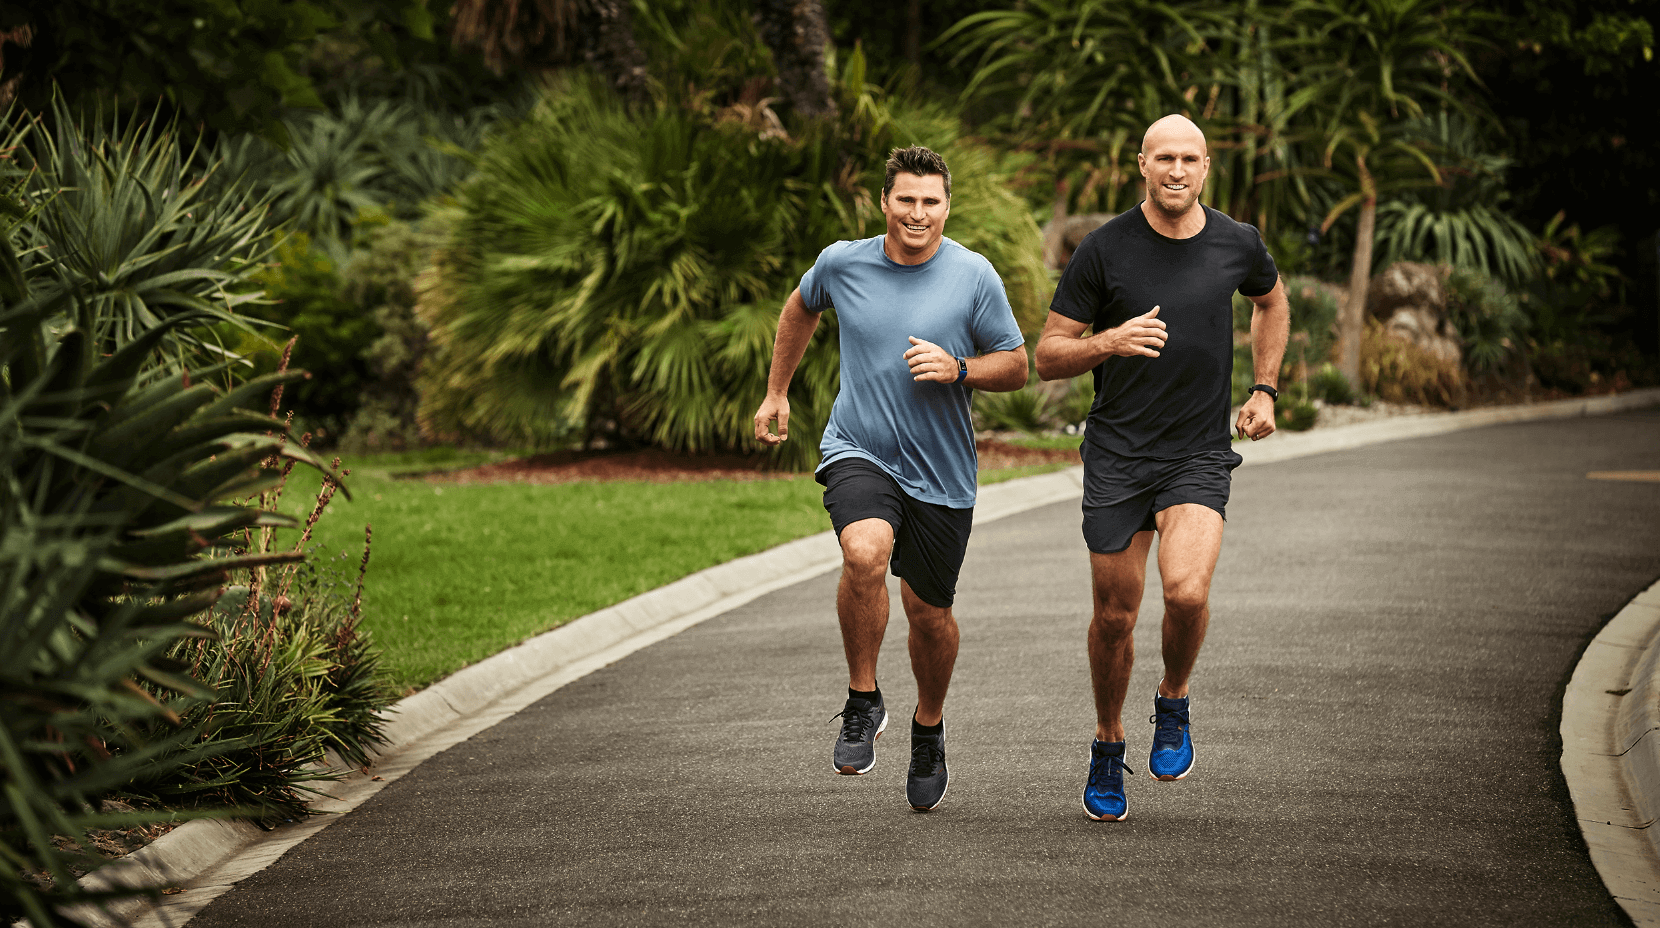 Chris Judd reflects on the workout habits of 3 highly successful people